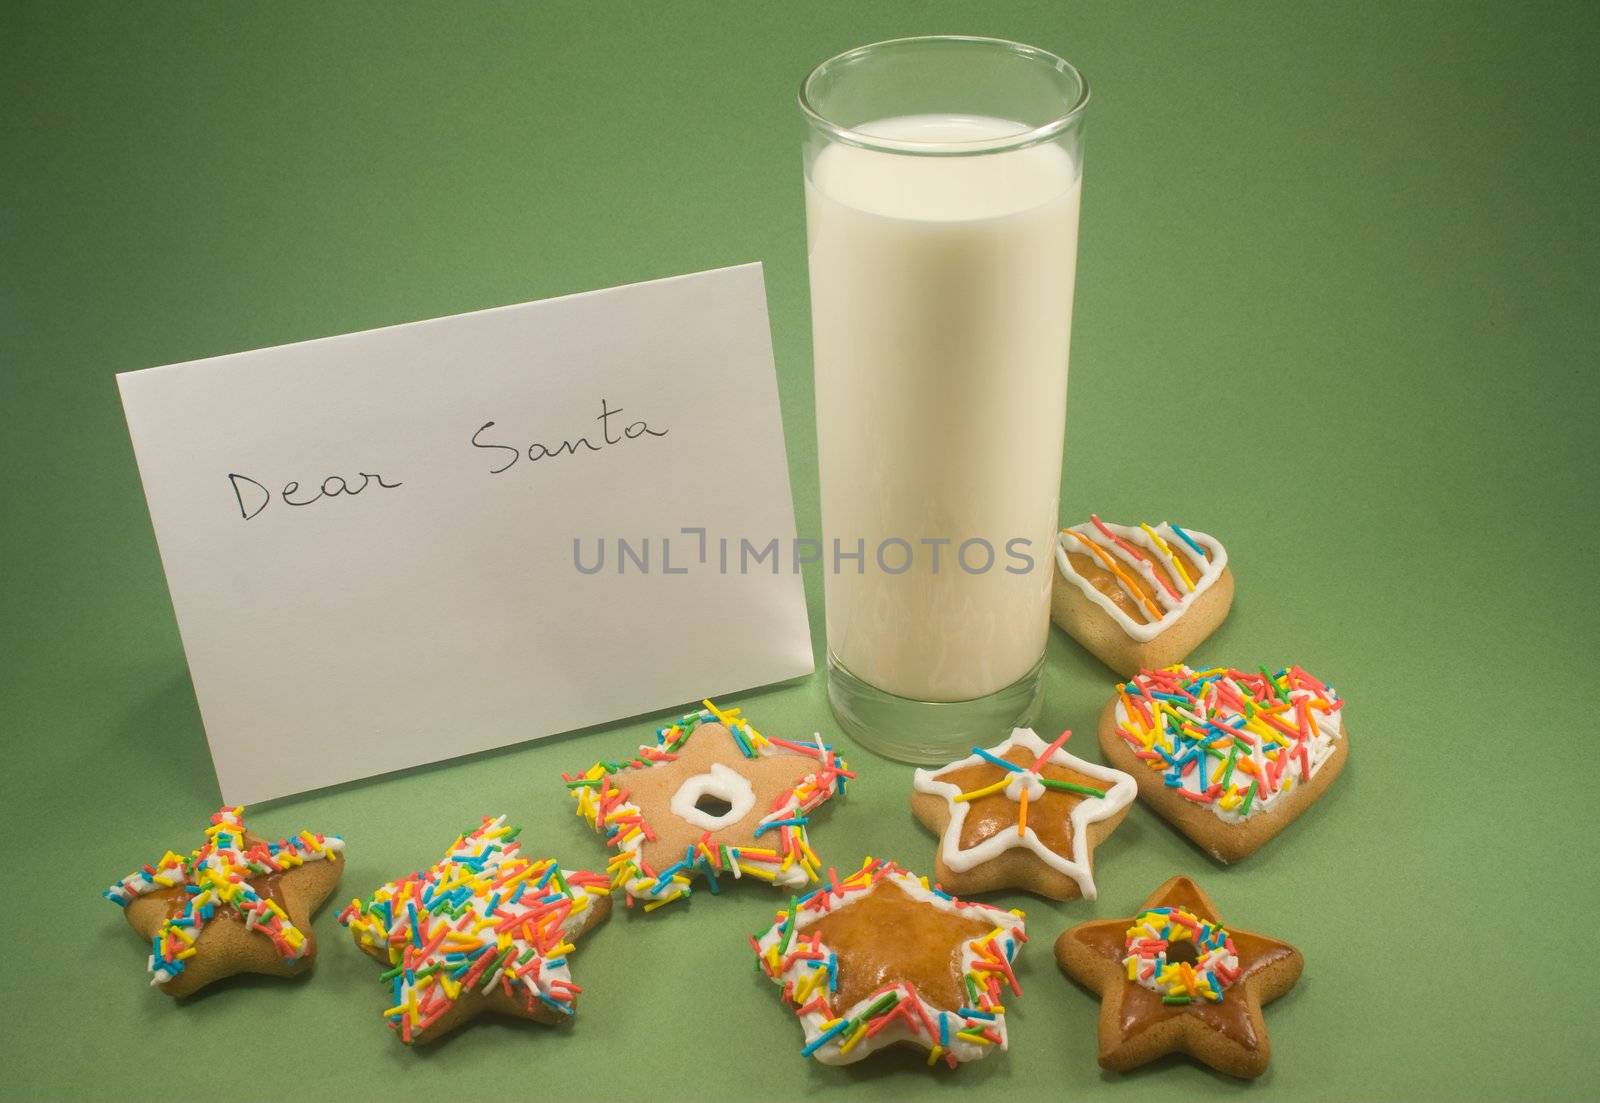 Cookies, milk and a letter to Santa by timscottrom